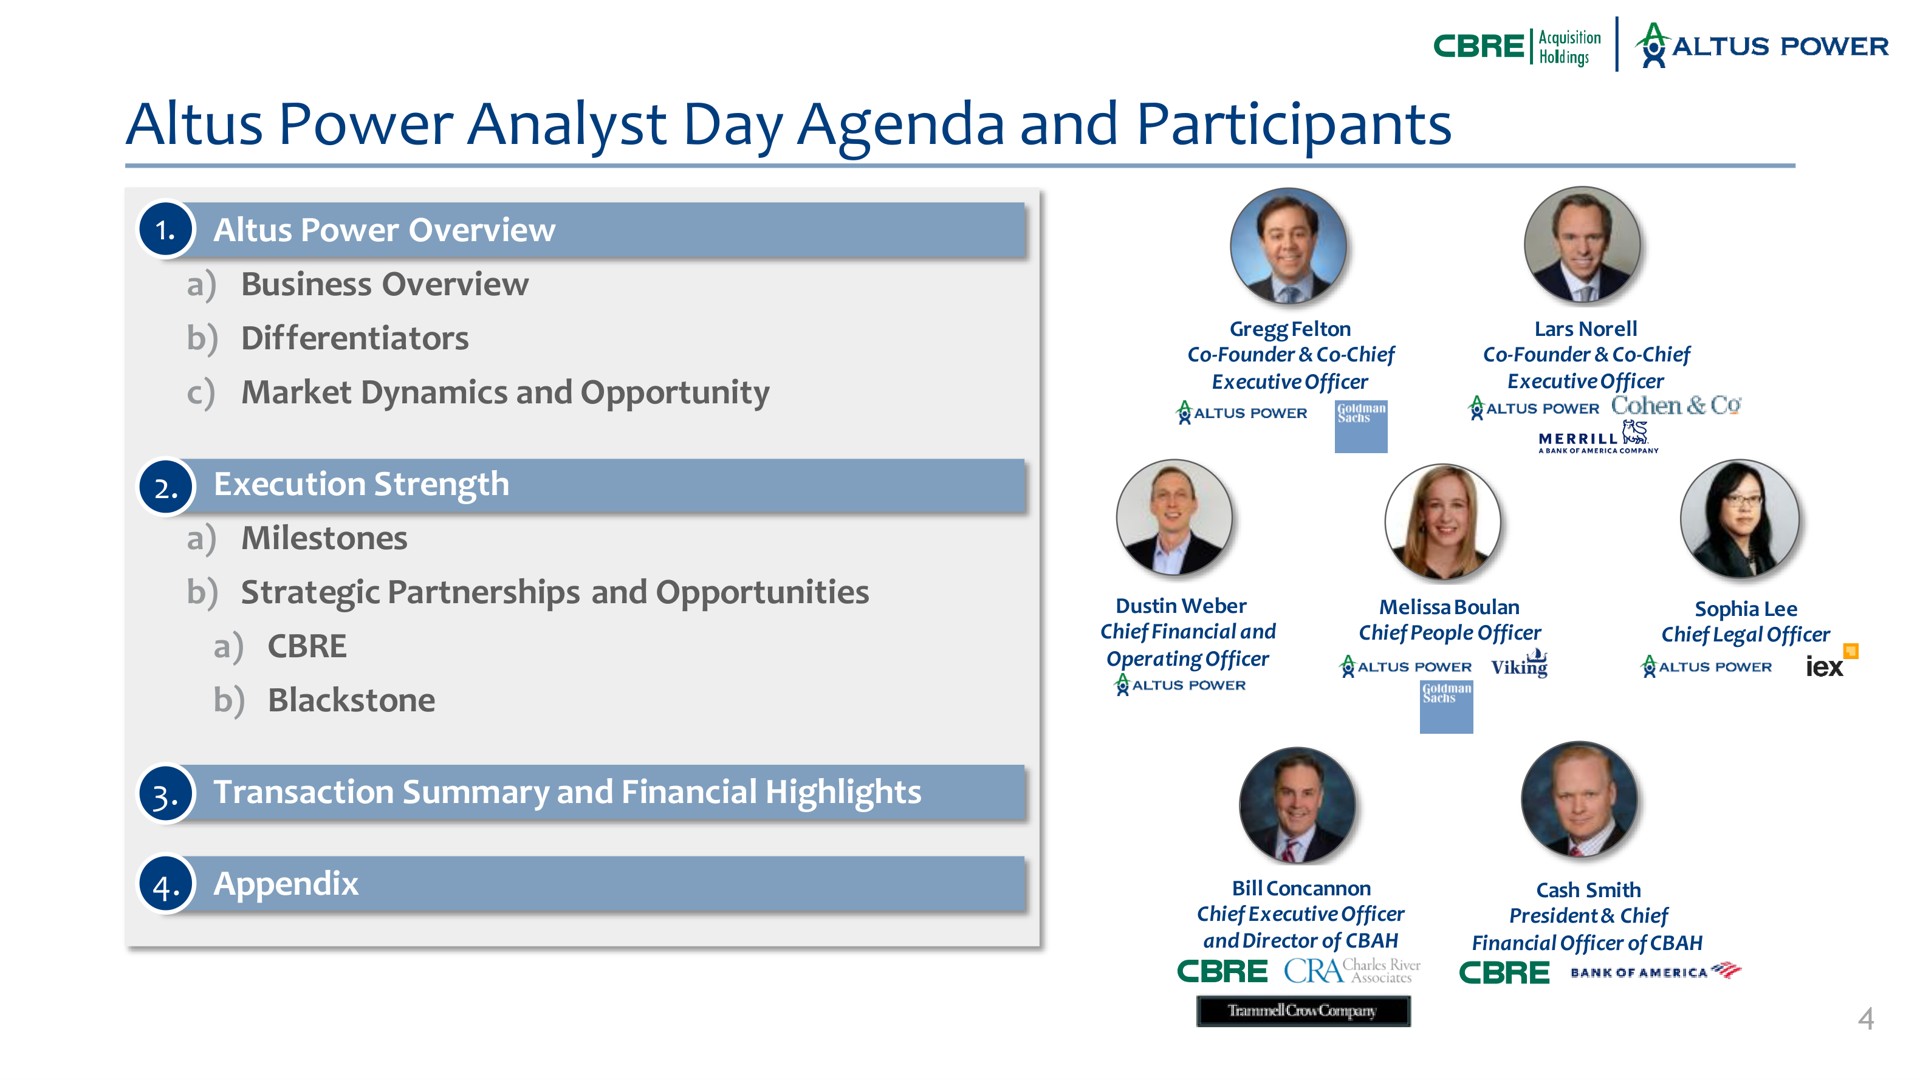 power analyst day agenda and participants power overview a business overview differentiators market dynamics and opportunity execution strength a milestones strategic partnerships and opportunities a transaction summary and financial highlights appendix | Altus Power